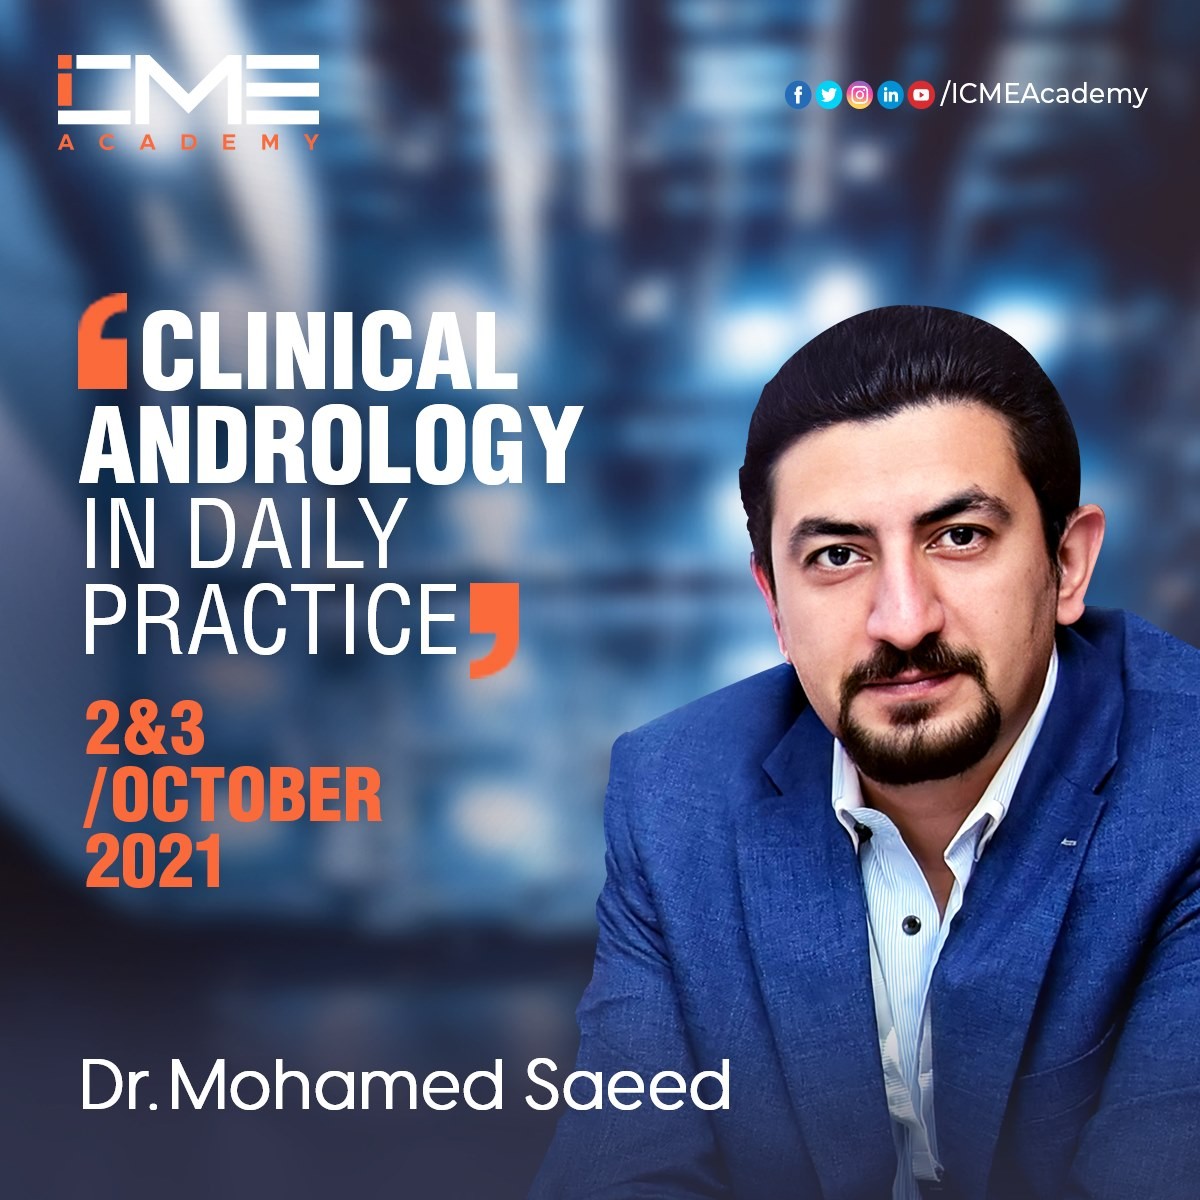 Practice Clinical Andrology with Dr. Mohamed Saeed